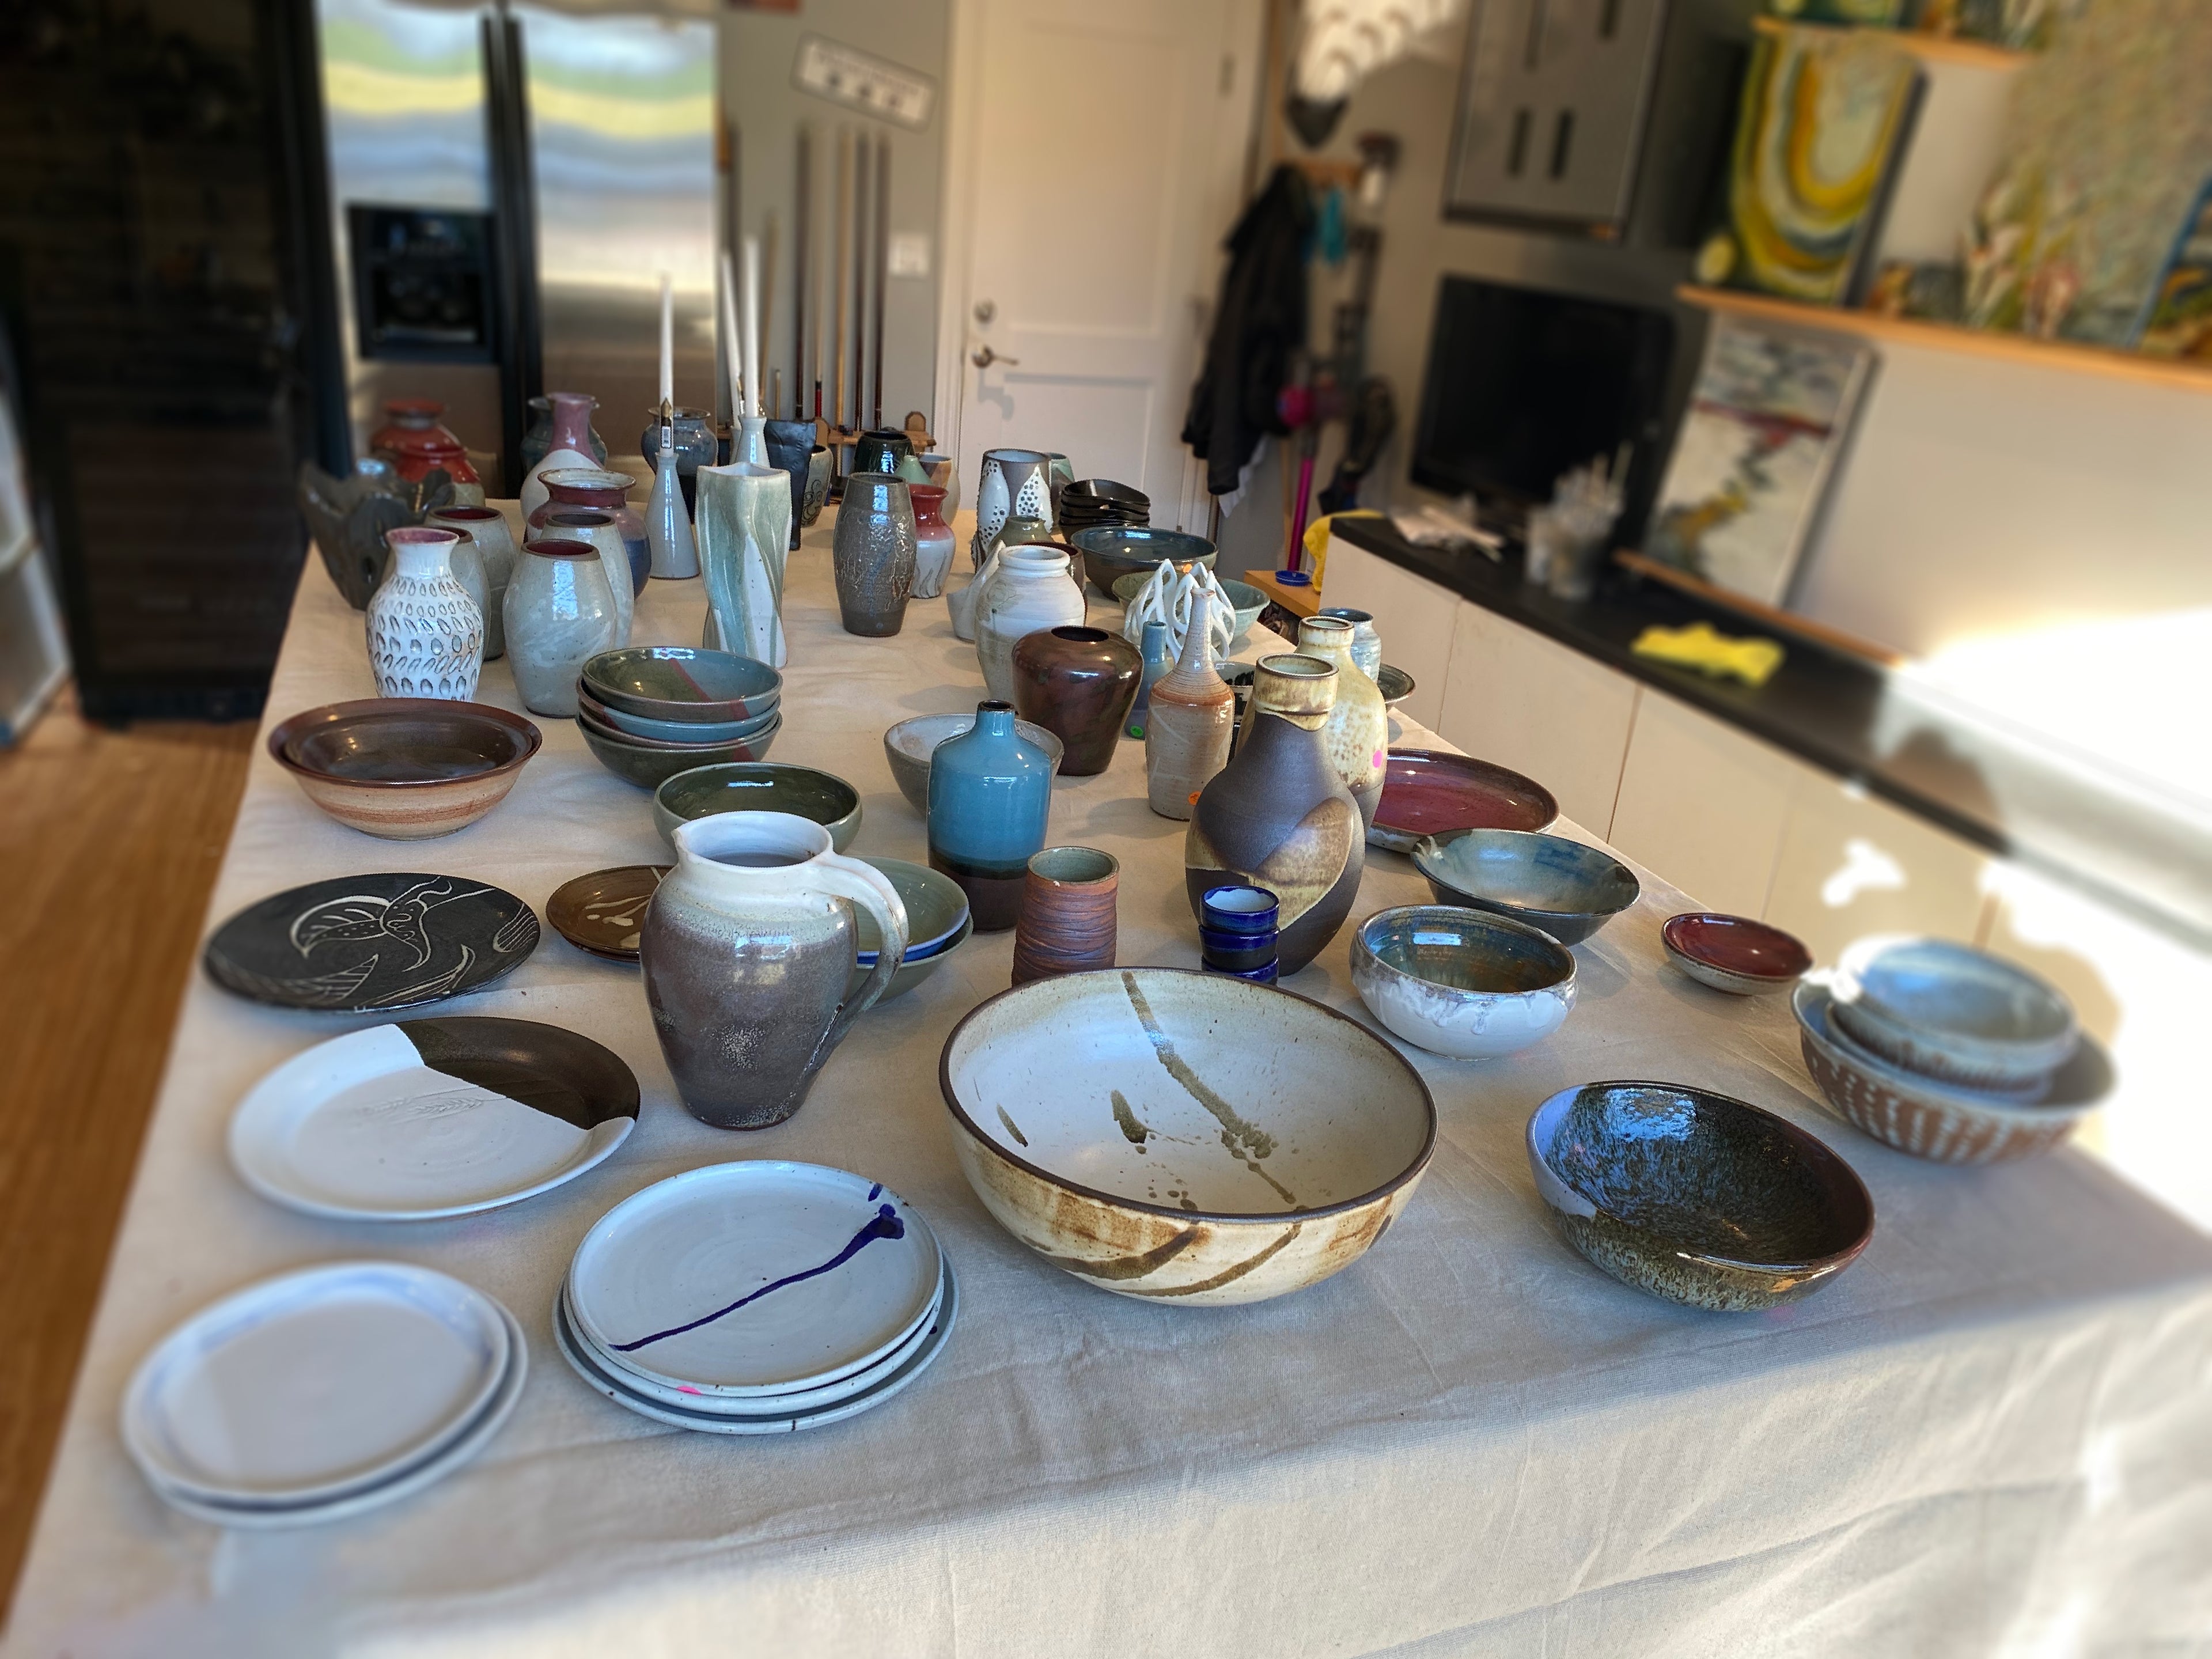 A variety of hand thrown ceramics including plates, bowls, vases, and sculptures. Glazed with white, brown, blues, and reds mainly.